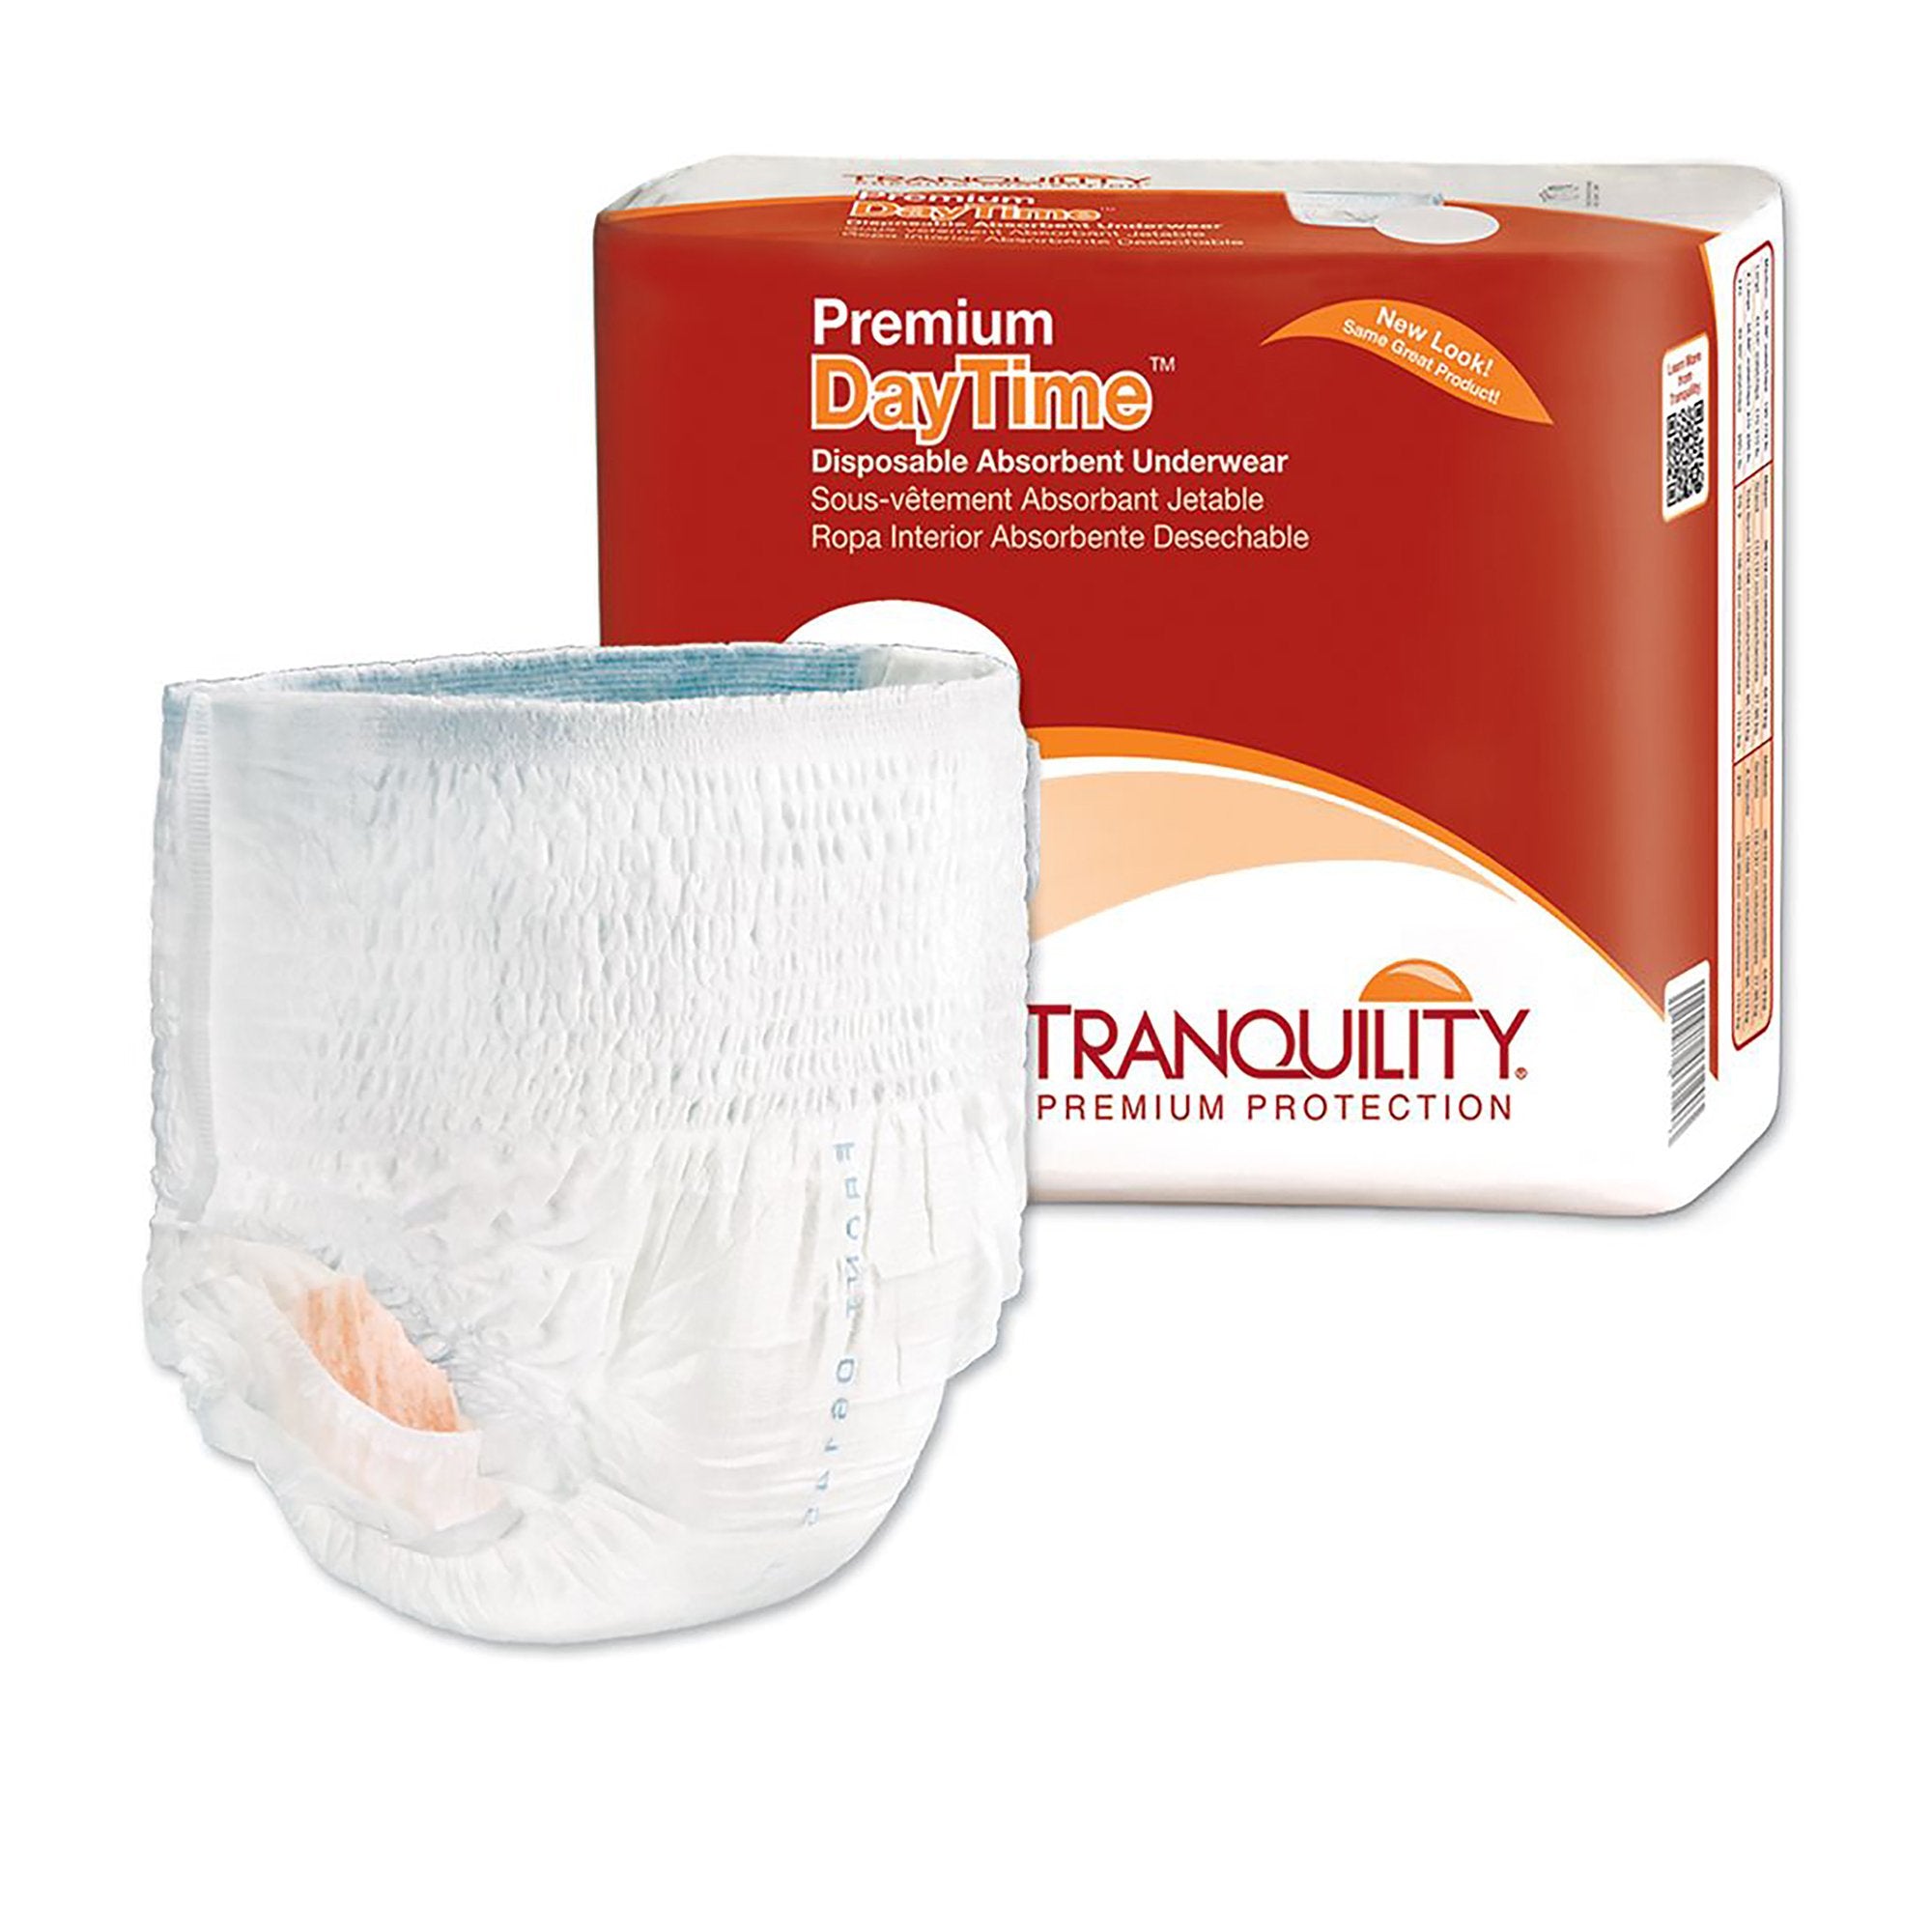 Unisex Adult Absorbent Underwear Tranquility Premium DayTime Pull On with Tear Away Seams 2X-Large Disposable Heavy Absorbency